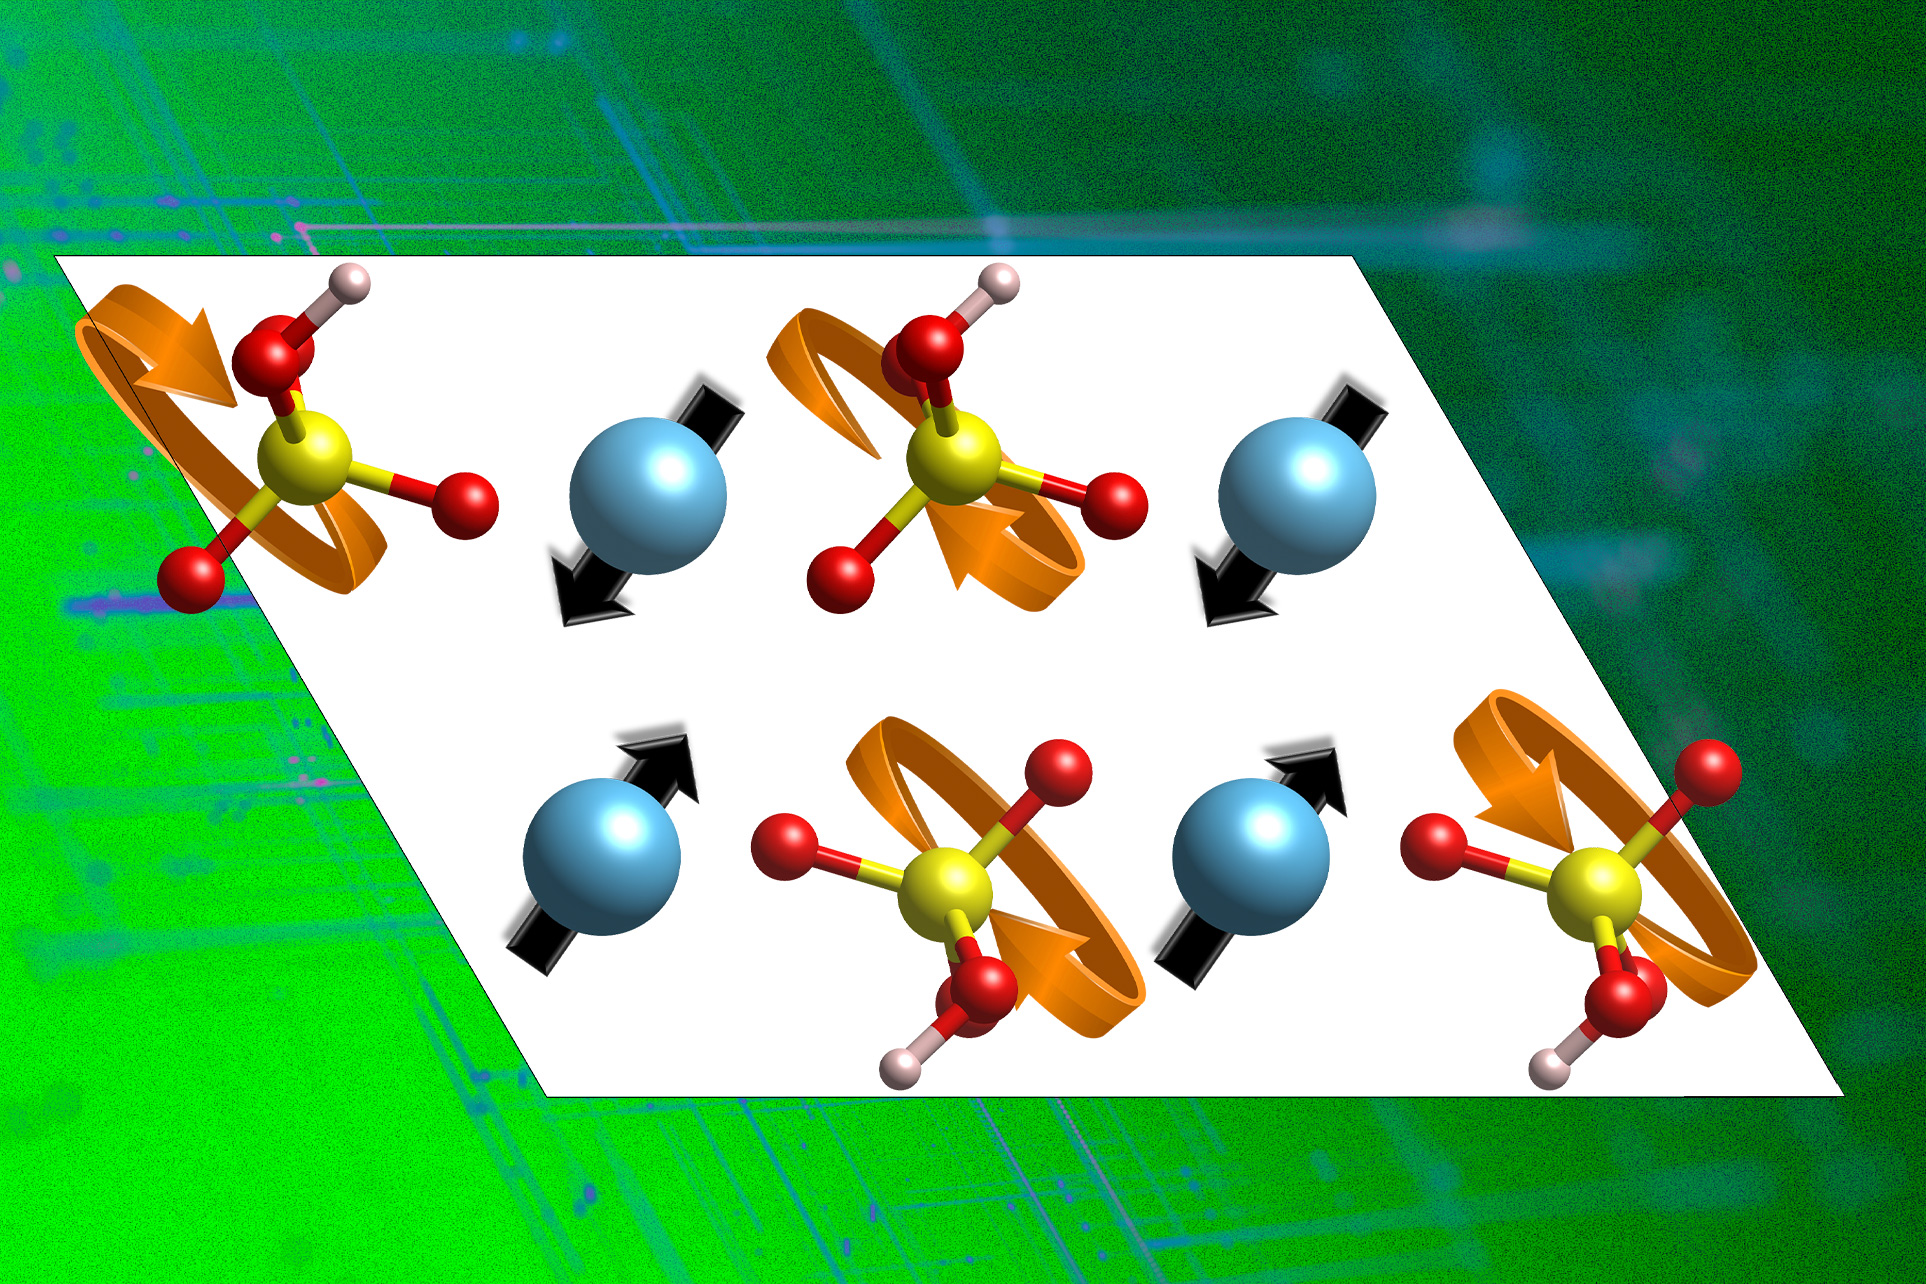 Proton-conducting materials could enable new green energy technologies